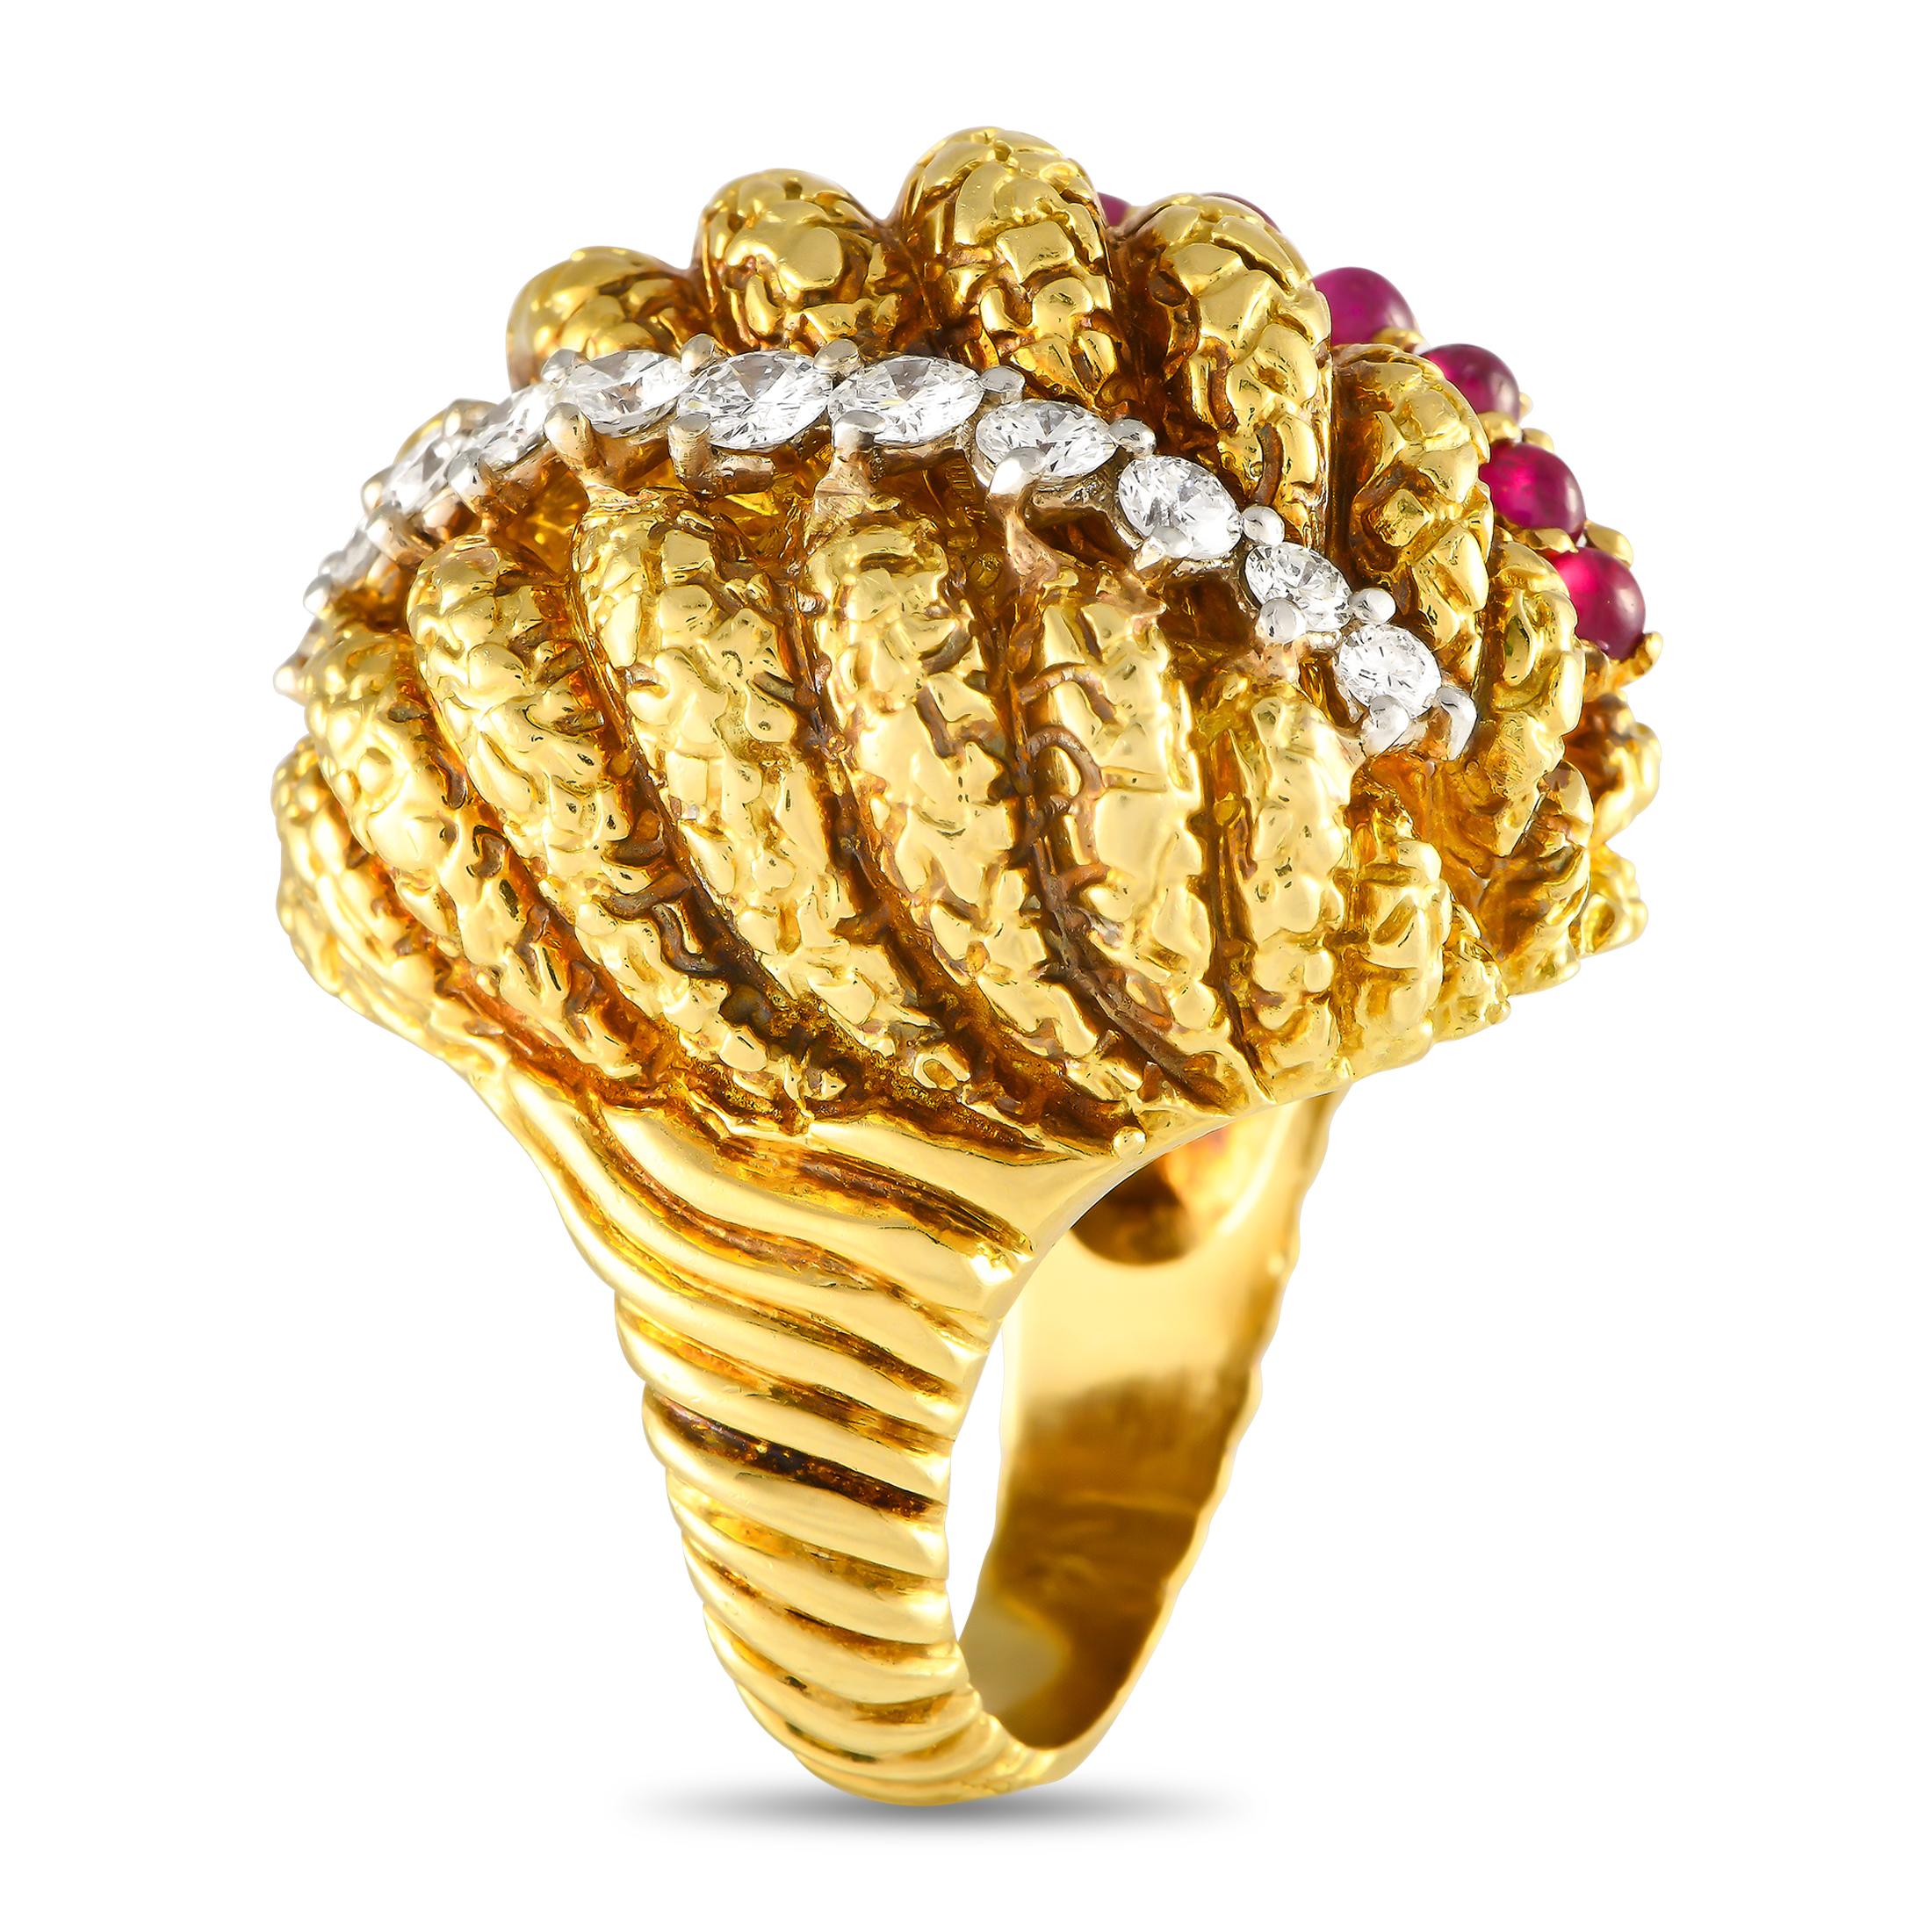 An intricately designed cocktail ring whose very presence demands attention. This 18K yellow gold beauty features a tapering ridged band that widens towards the oversized domed top. The eye-catching centerpiece features a row of diamonds and a row